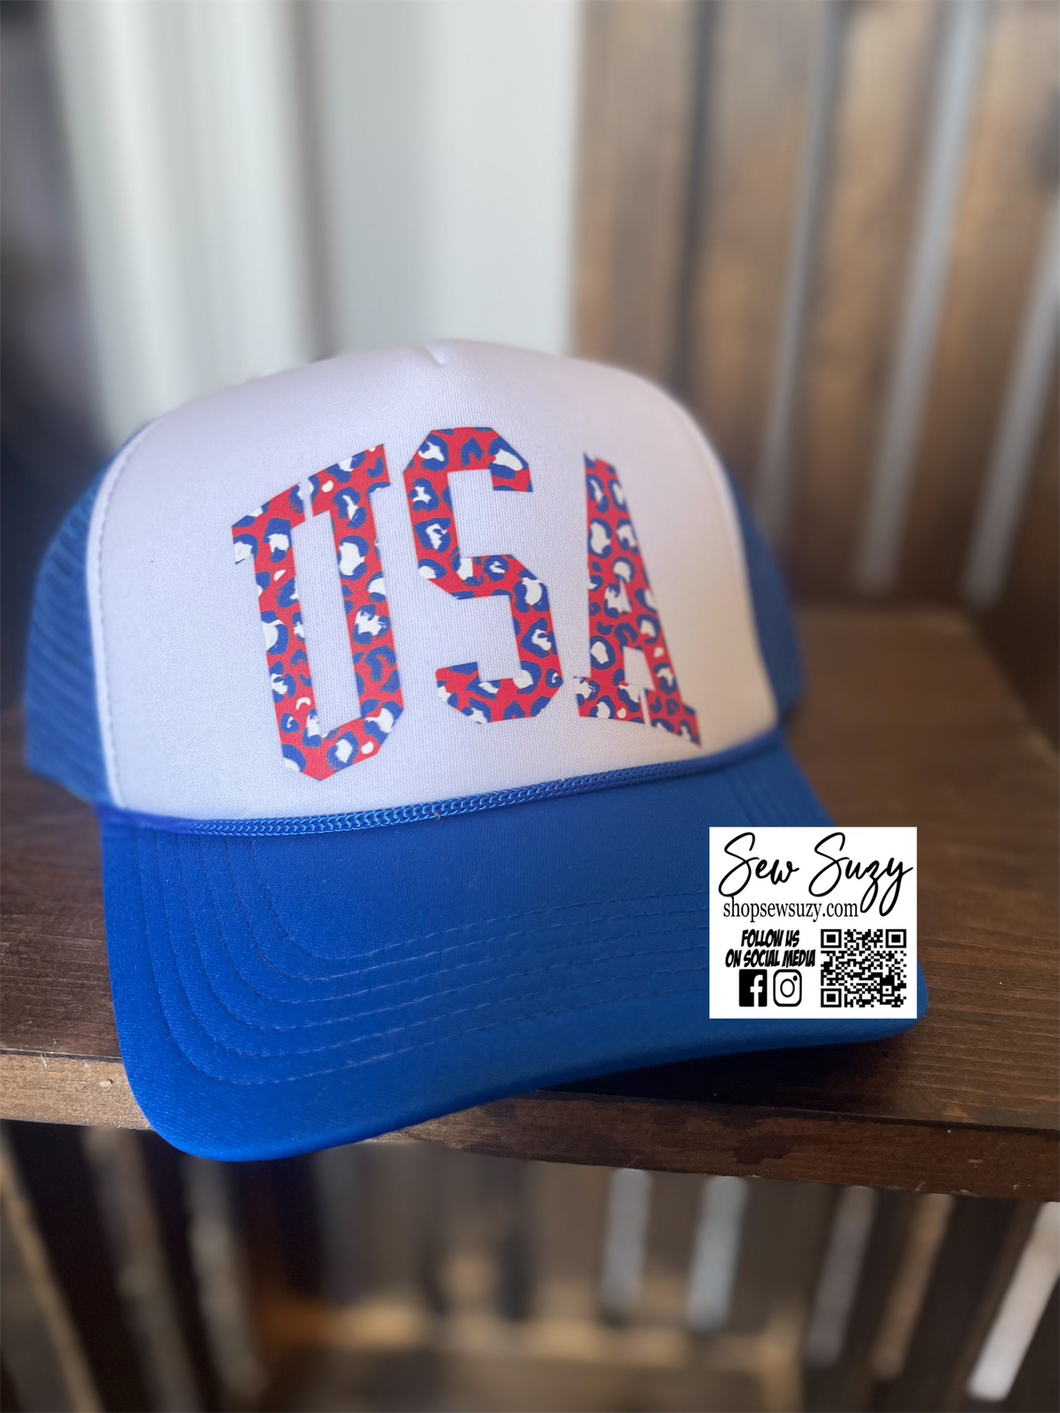 USA hat red/white/blue on blue hat